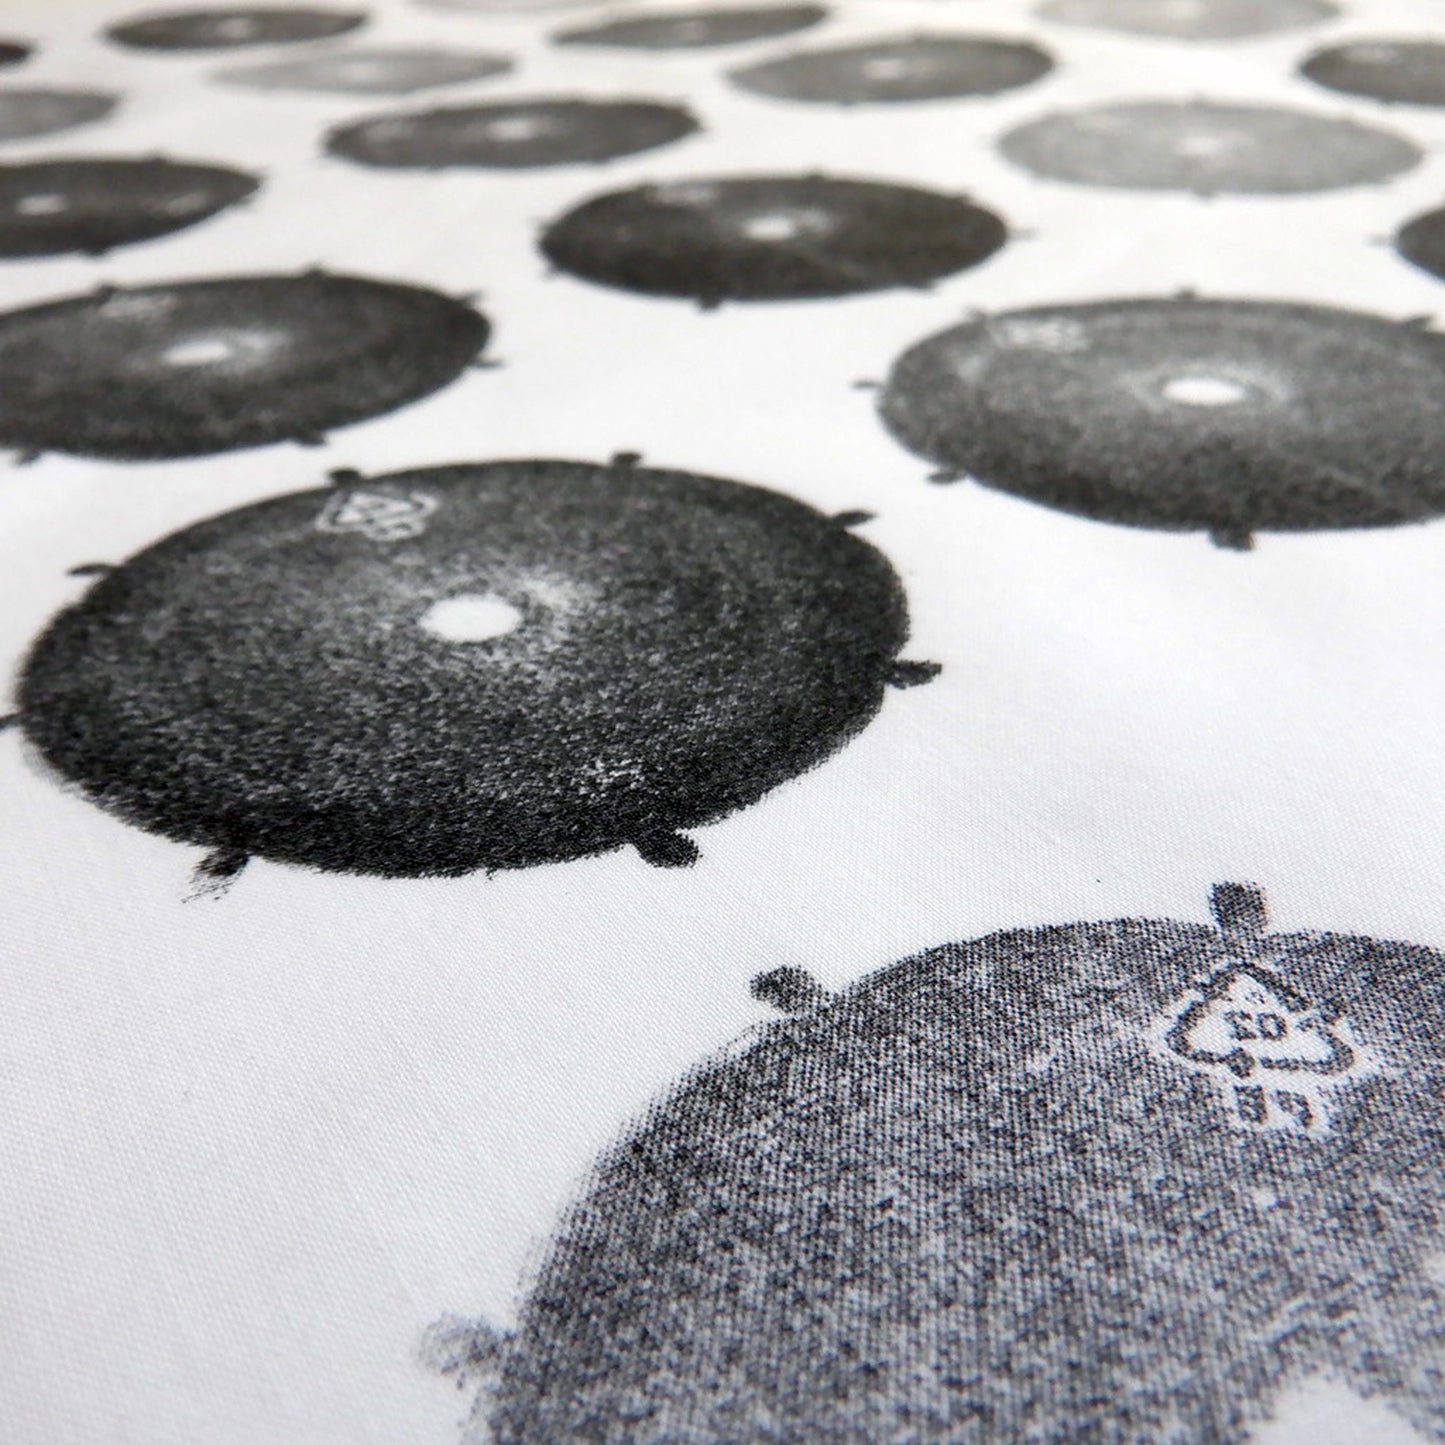 Close up printed fabric, made from a discarded plastic drum cap, in varying shades of black and grey, printed onto reclaimed white cotton.